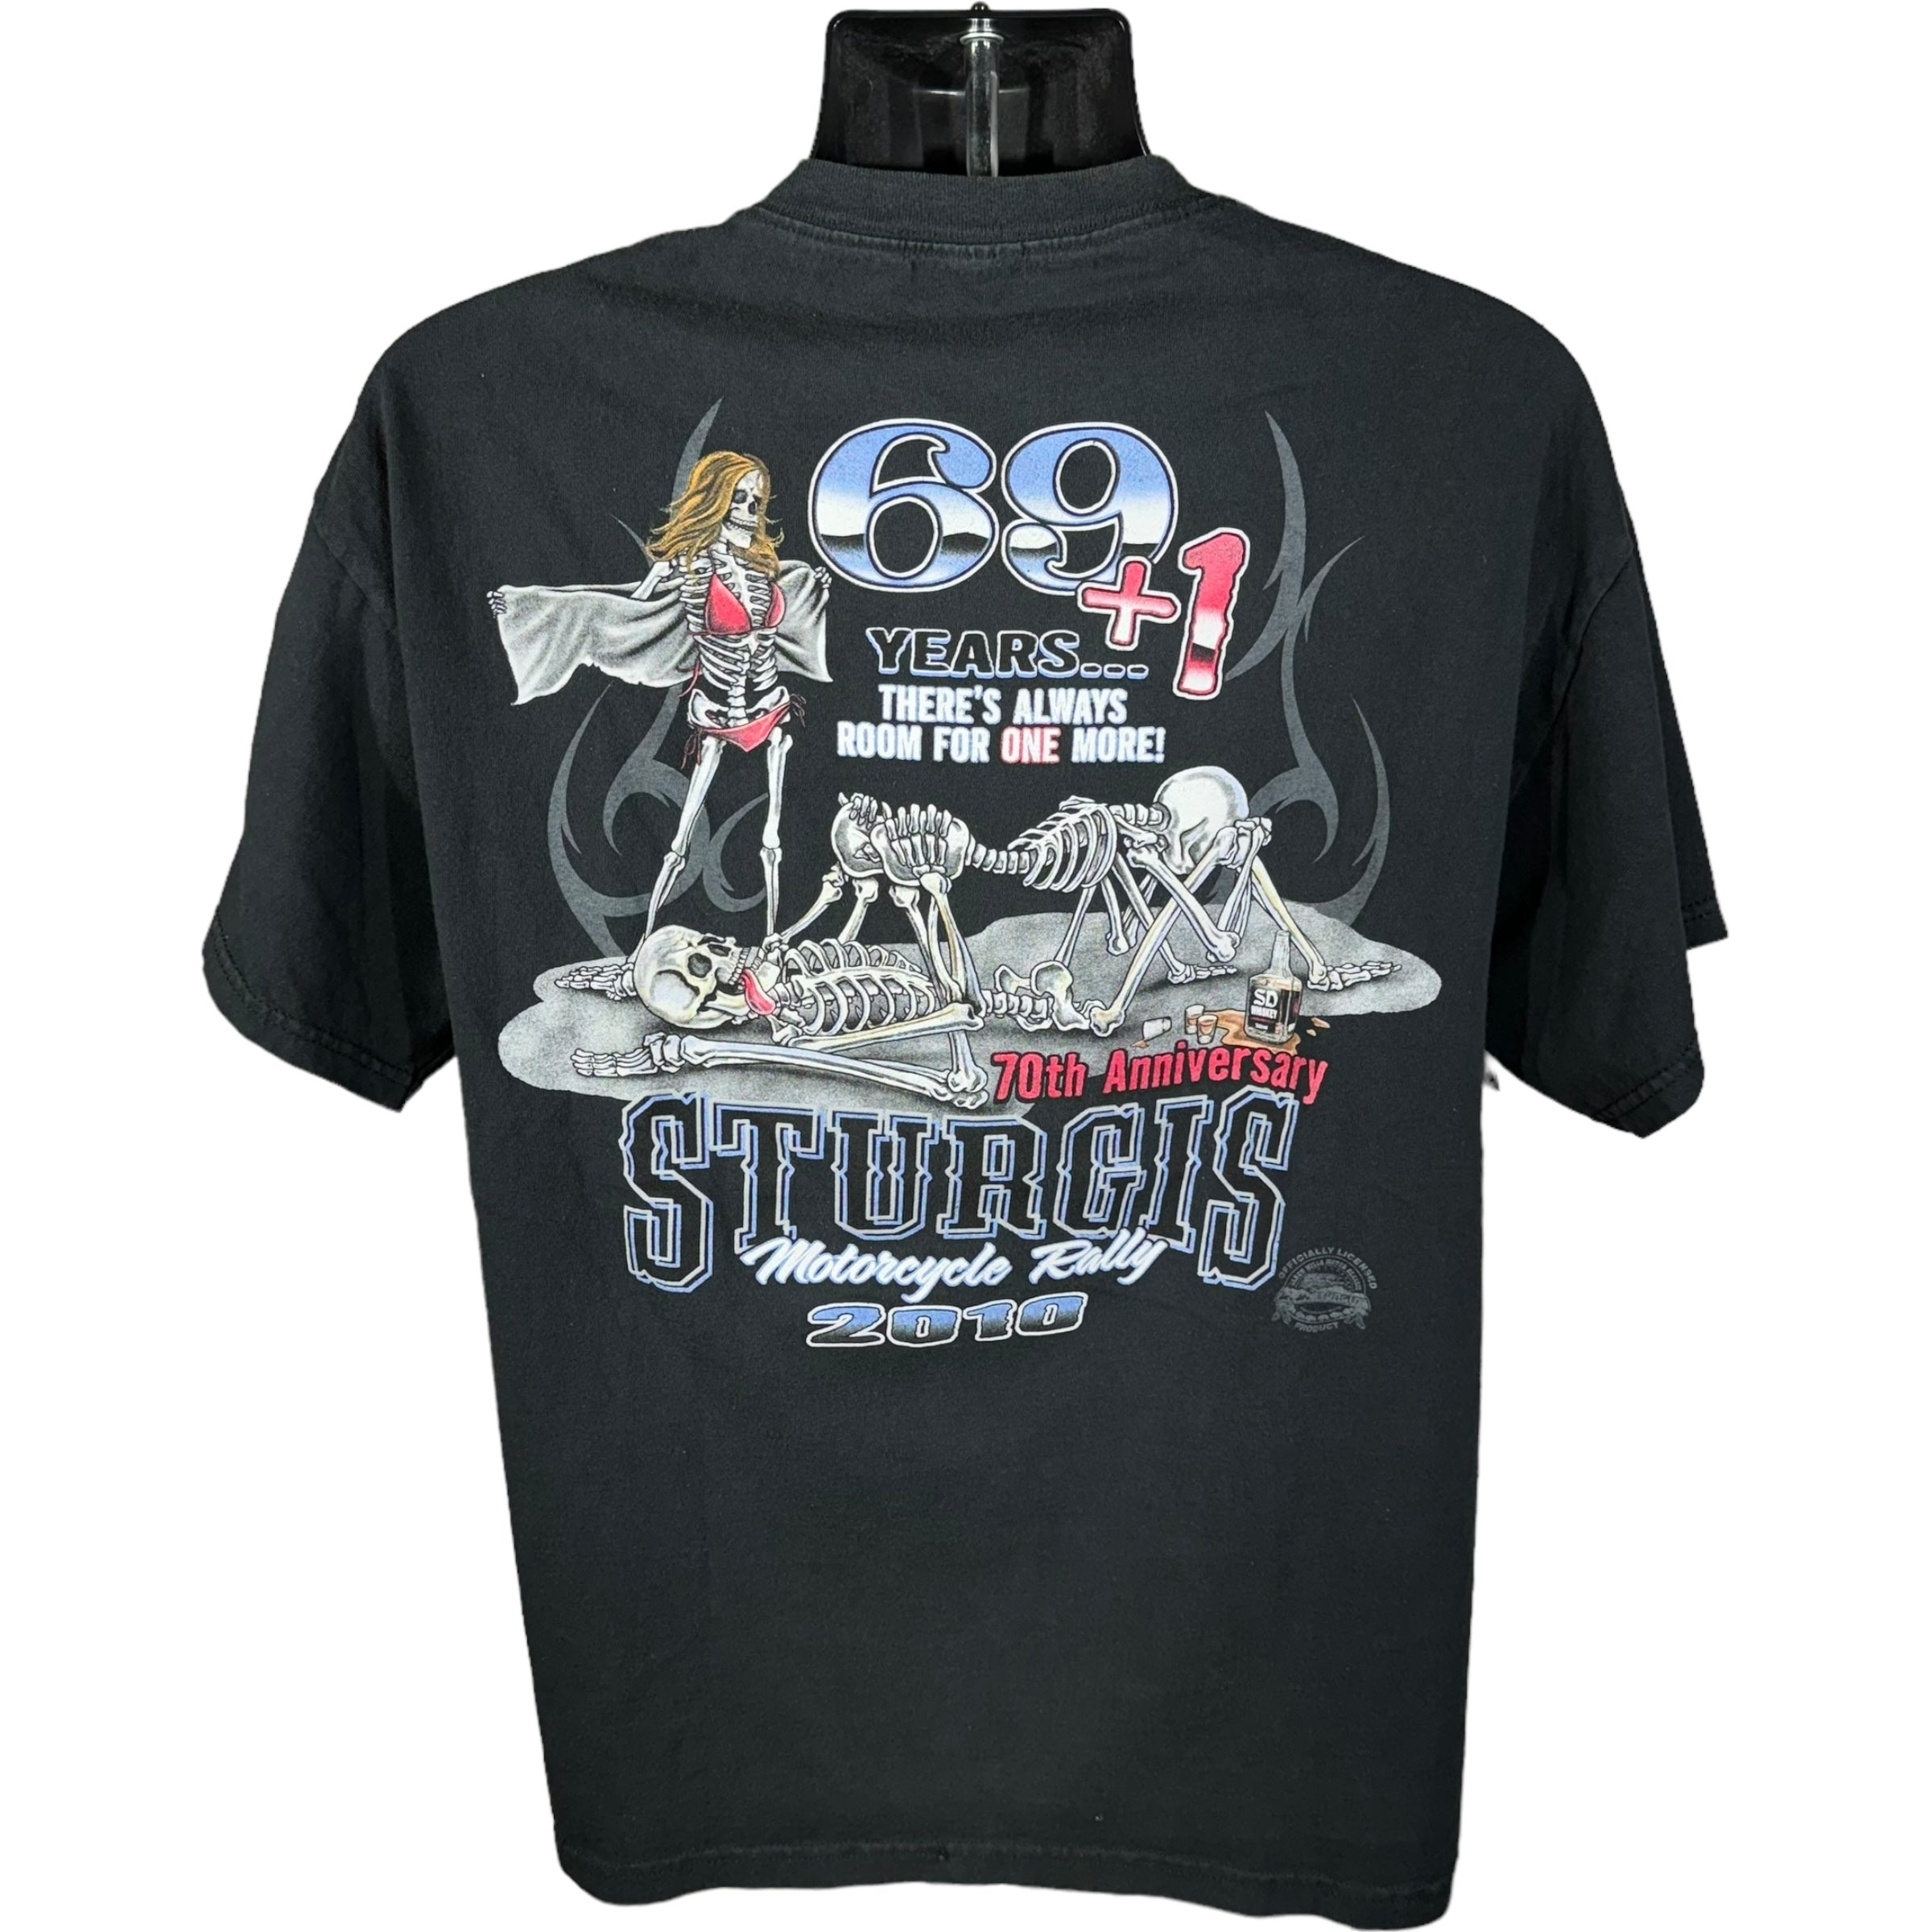 Sturgis 70th Anniversary Motorcycle Rally Mullet Tee